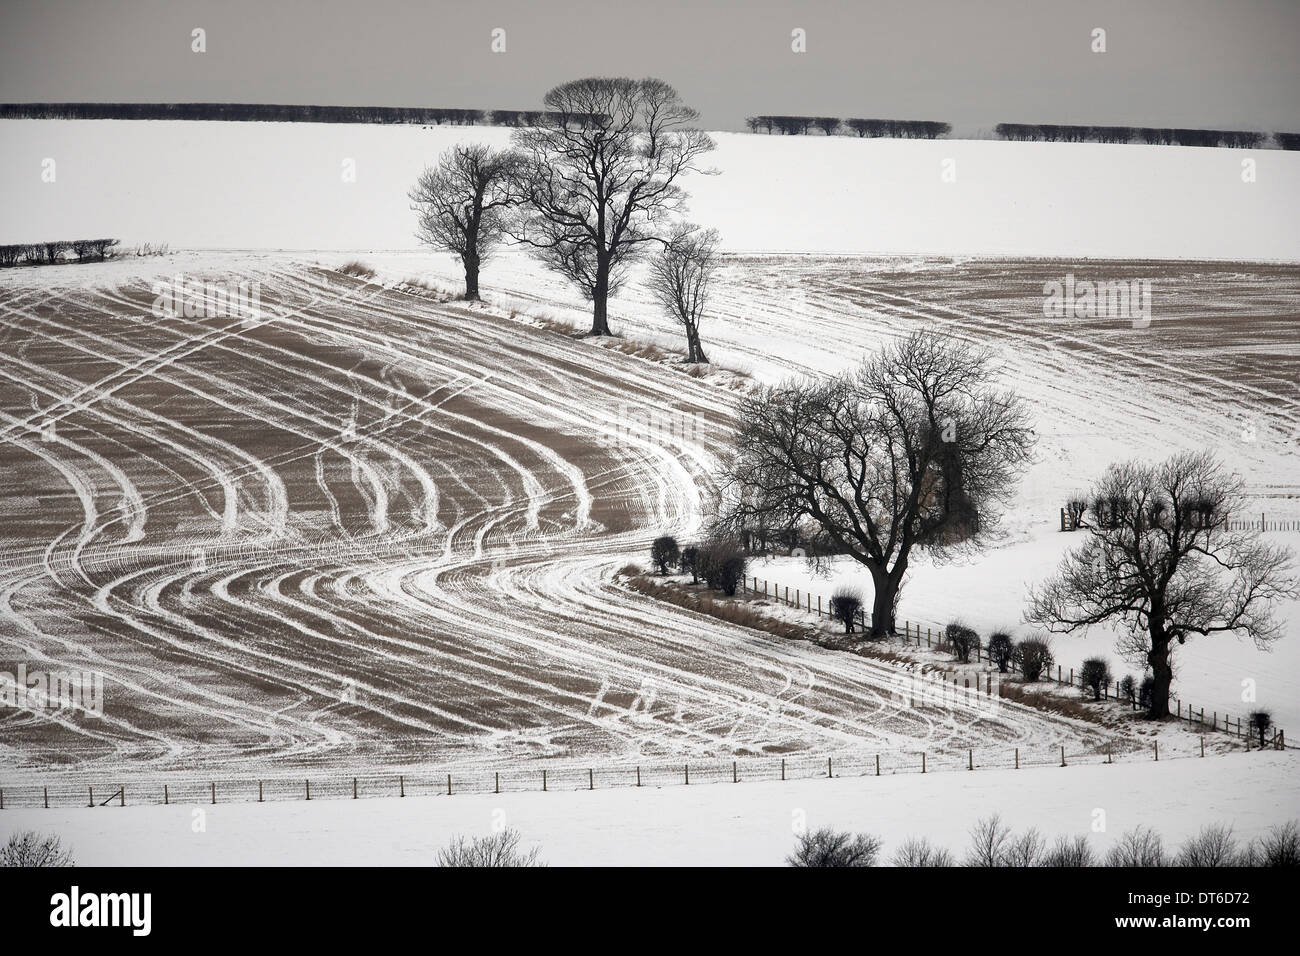 Snow covered farming landscape of the East Yorkshire Wolds near Wharram Percy Stock Photo